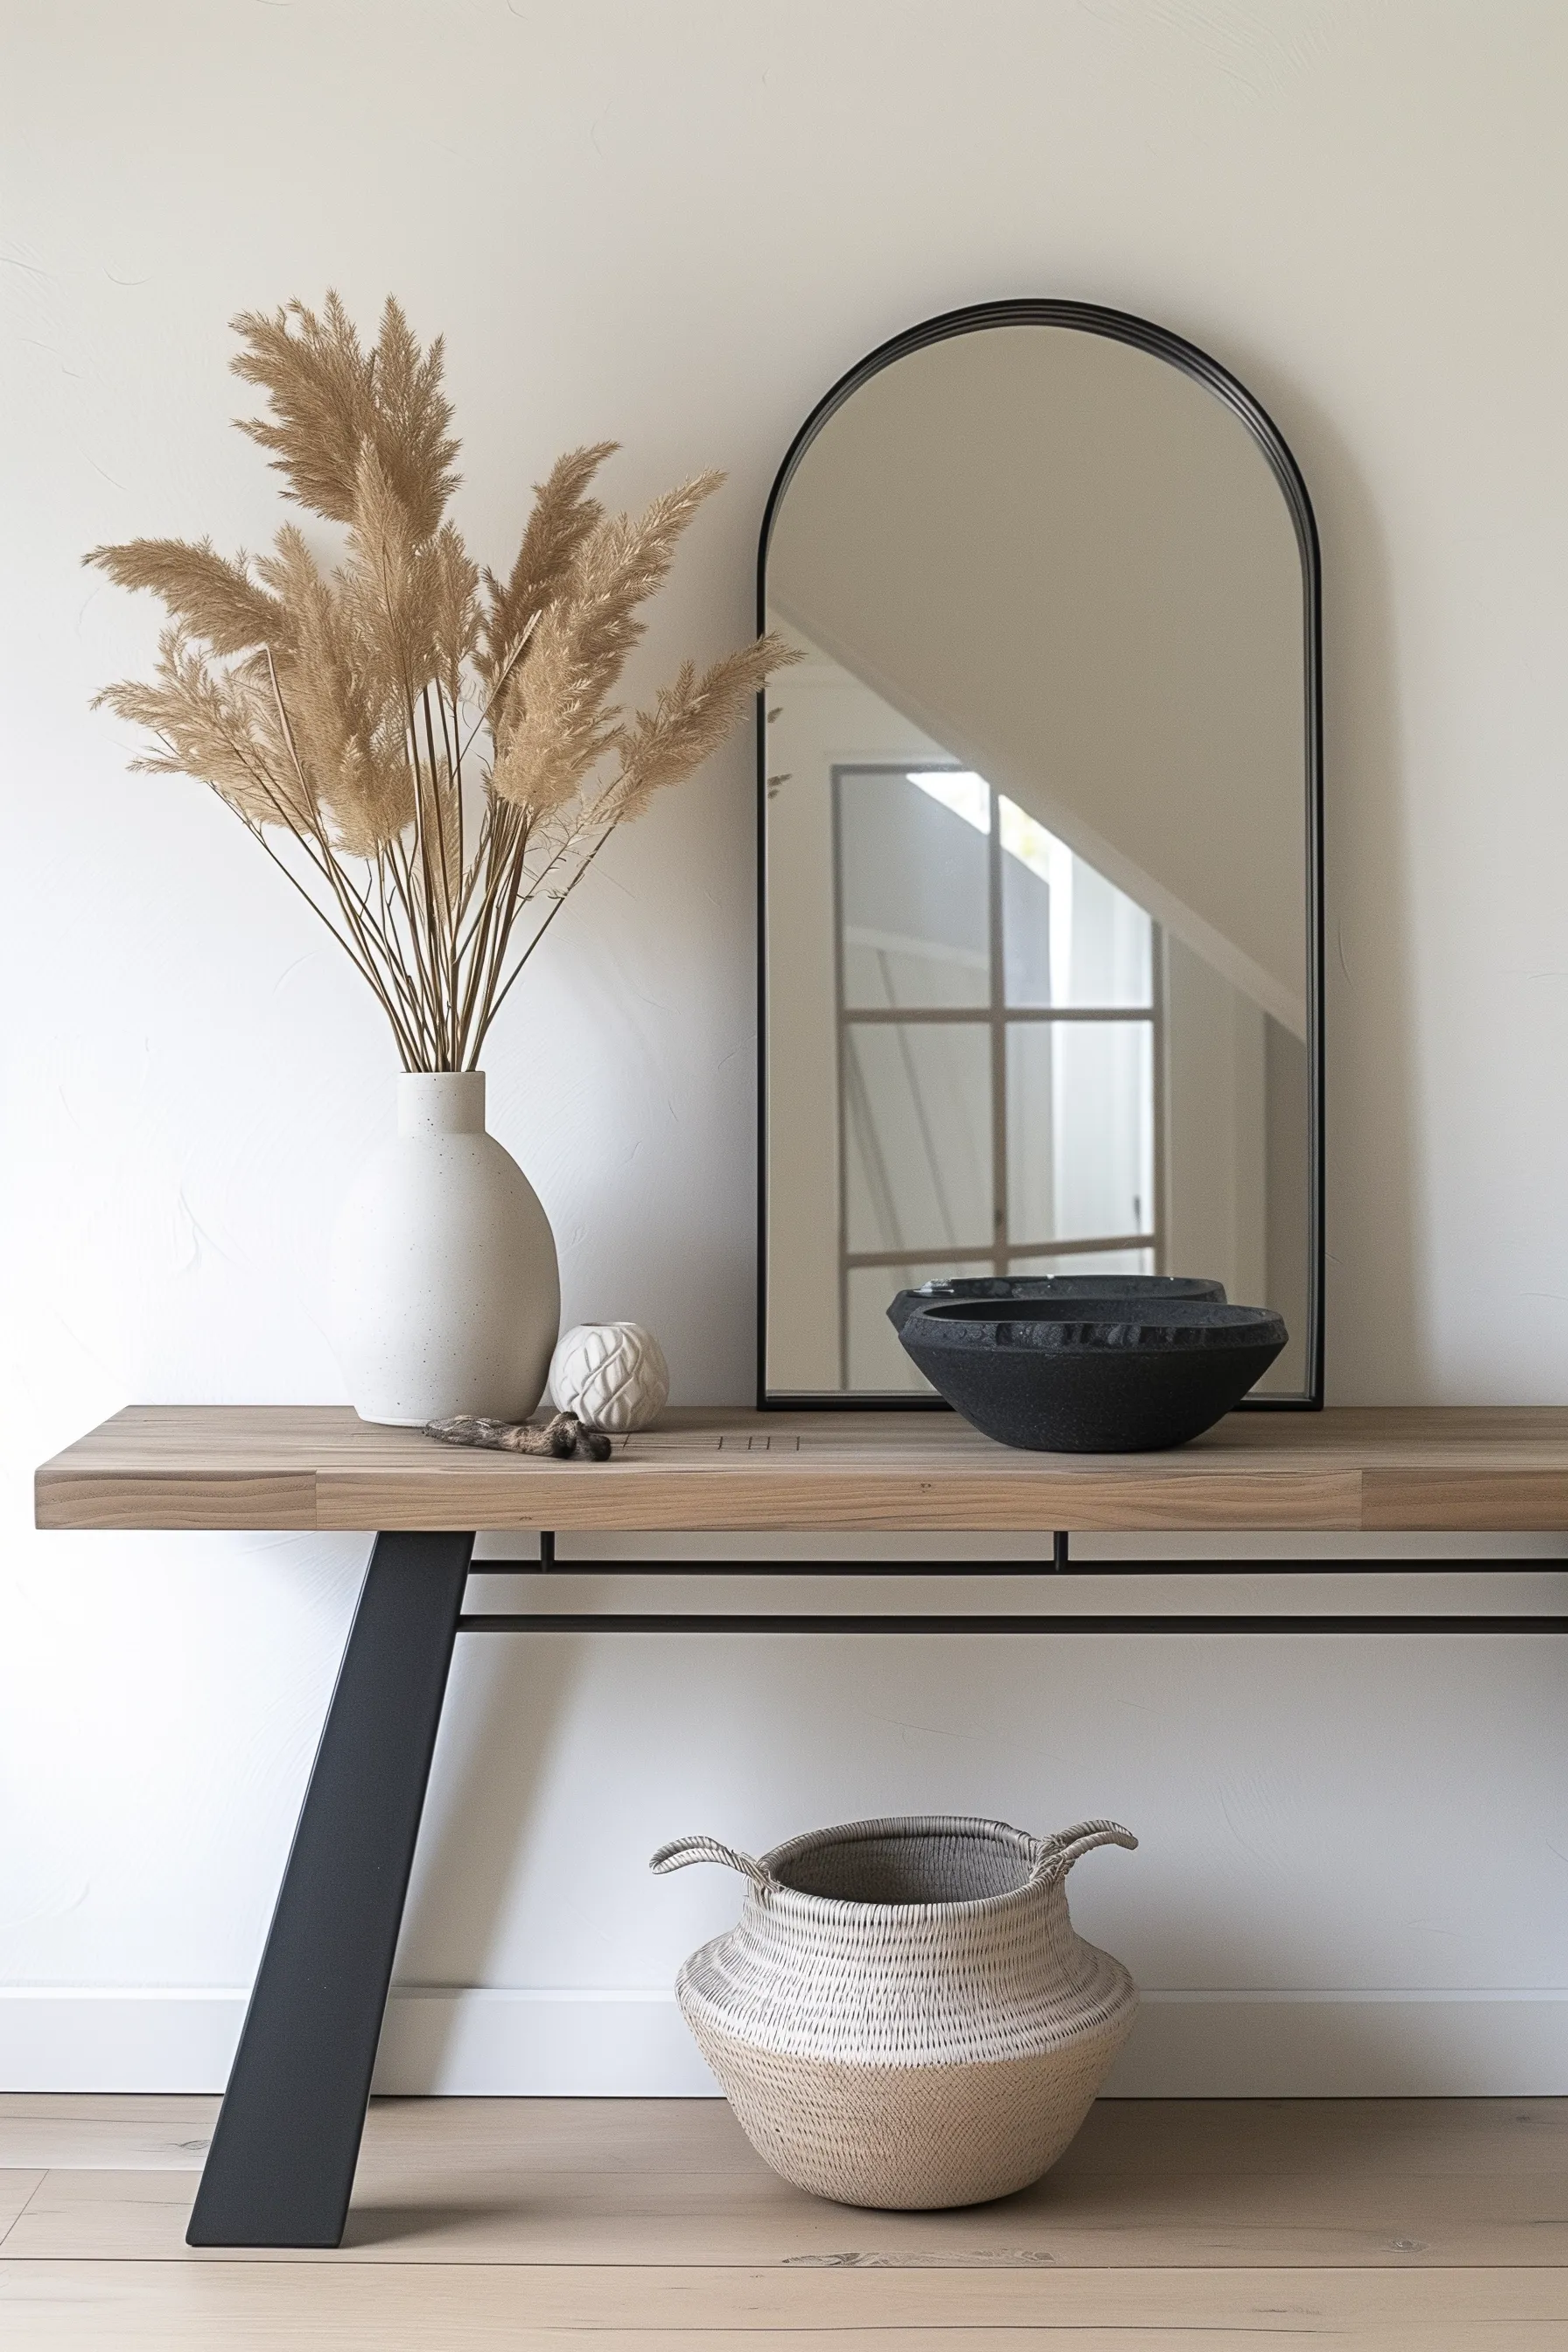 A black and wood entry table with a bowl and arc shaped mirror.